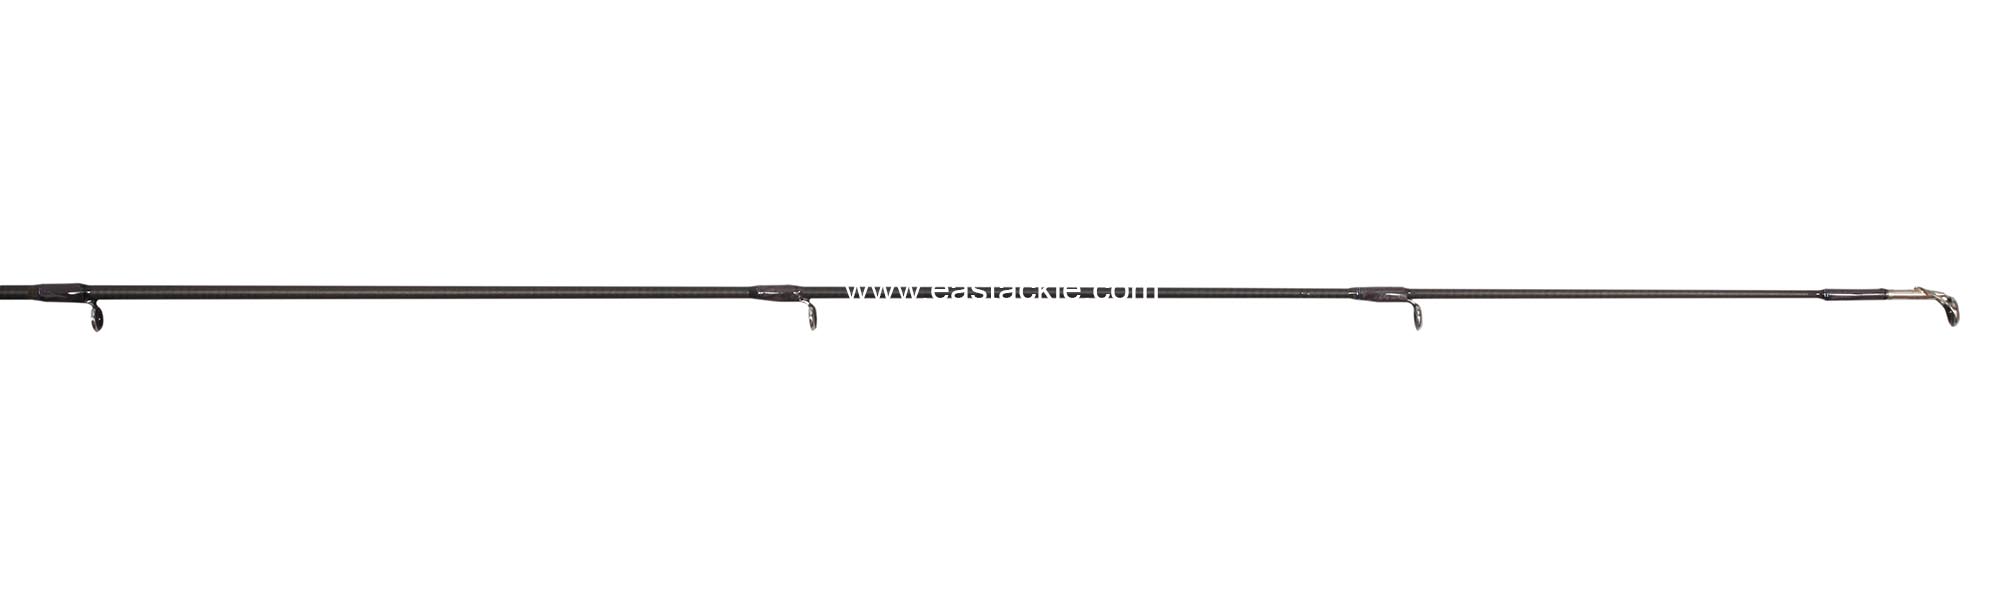 Storm - Adventure AVS662MHF - Spinning Rod - Tip Section (Side View) | Eastackle